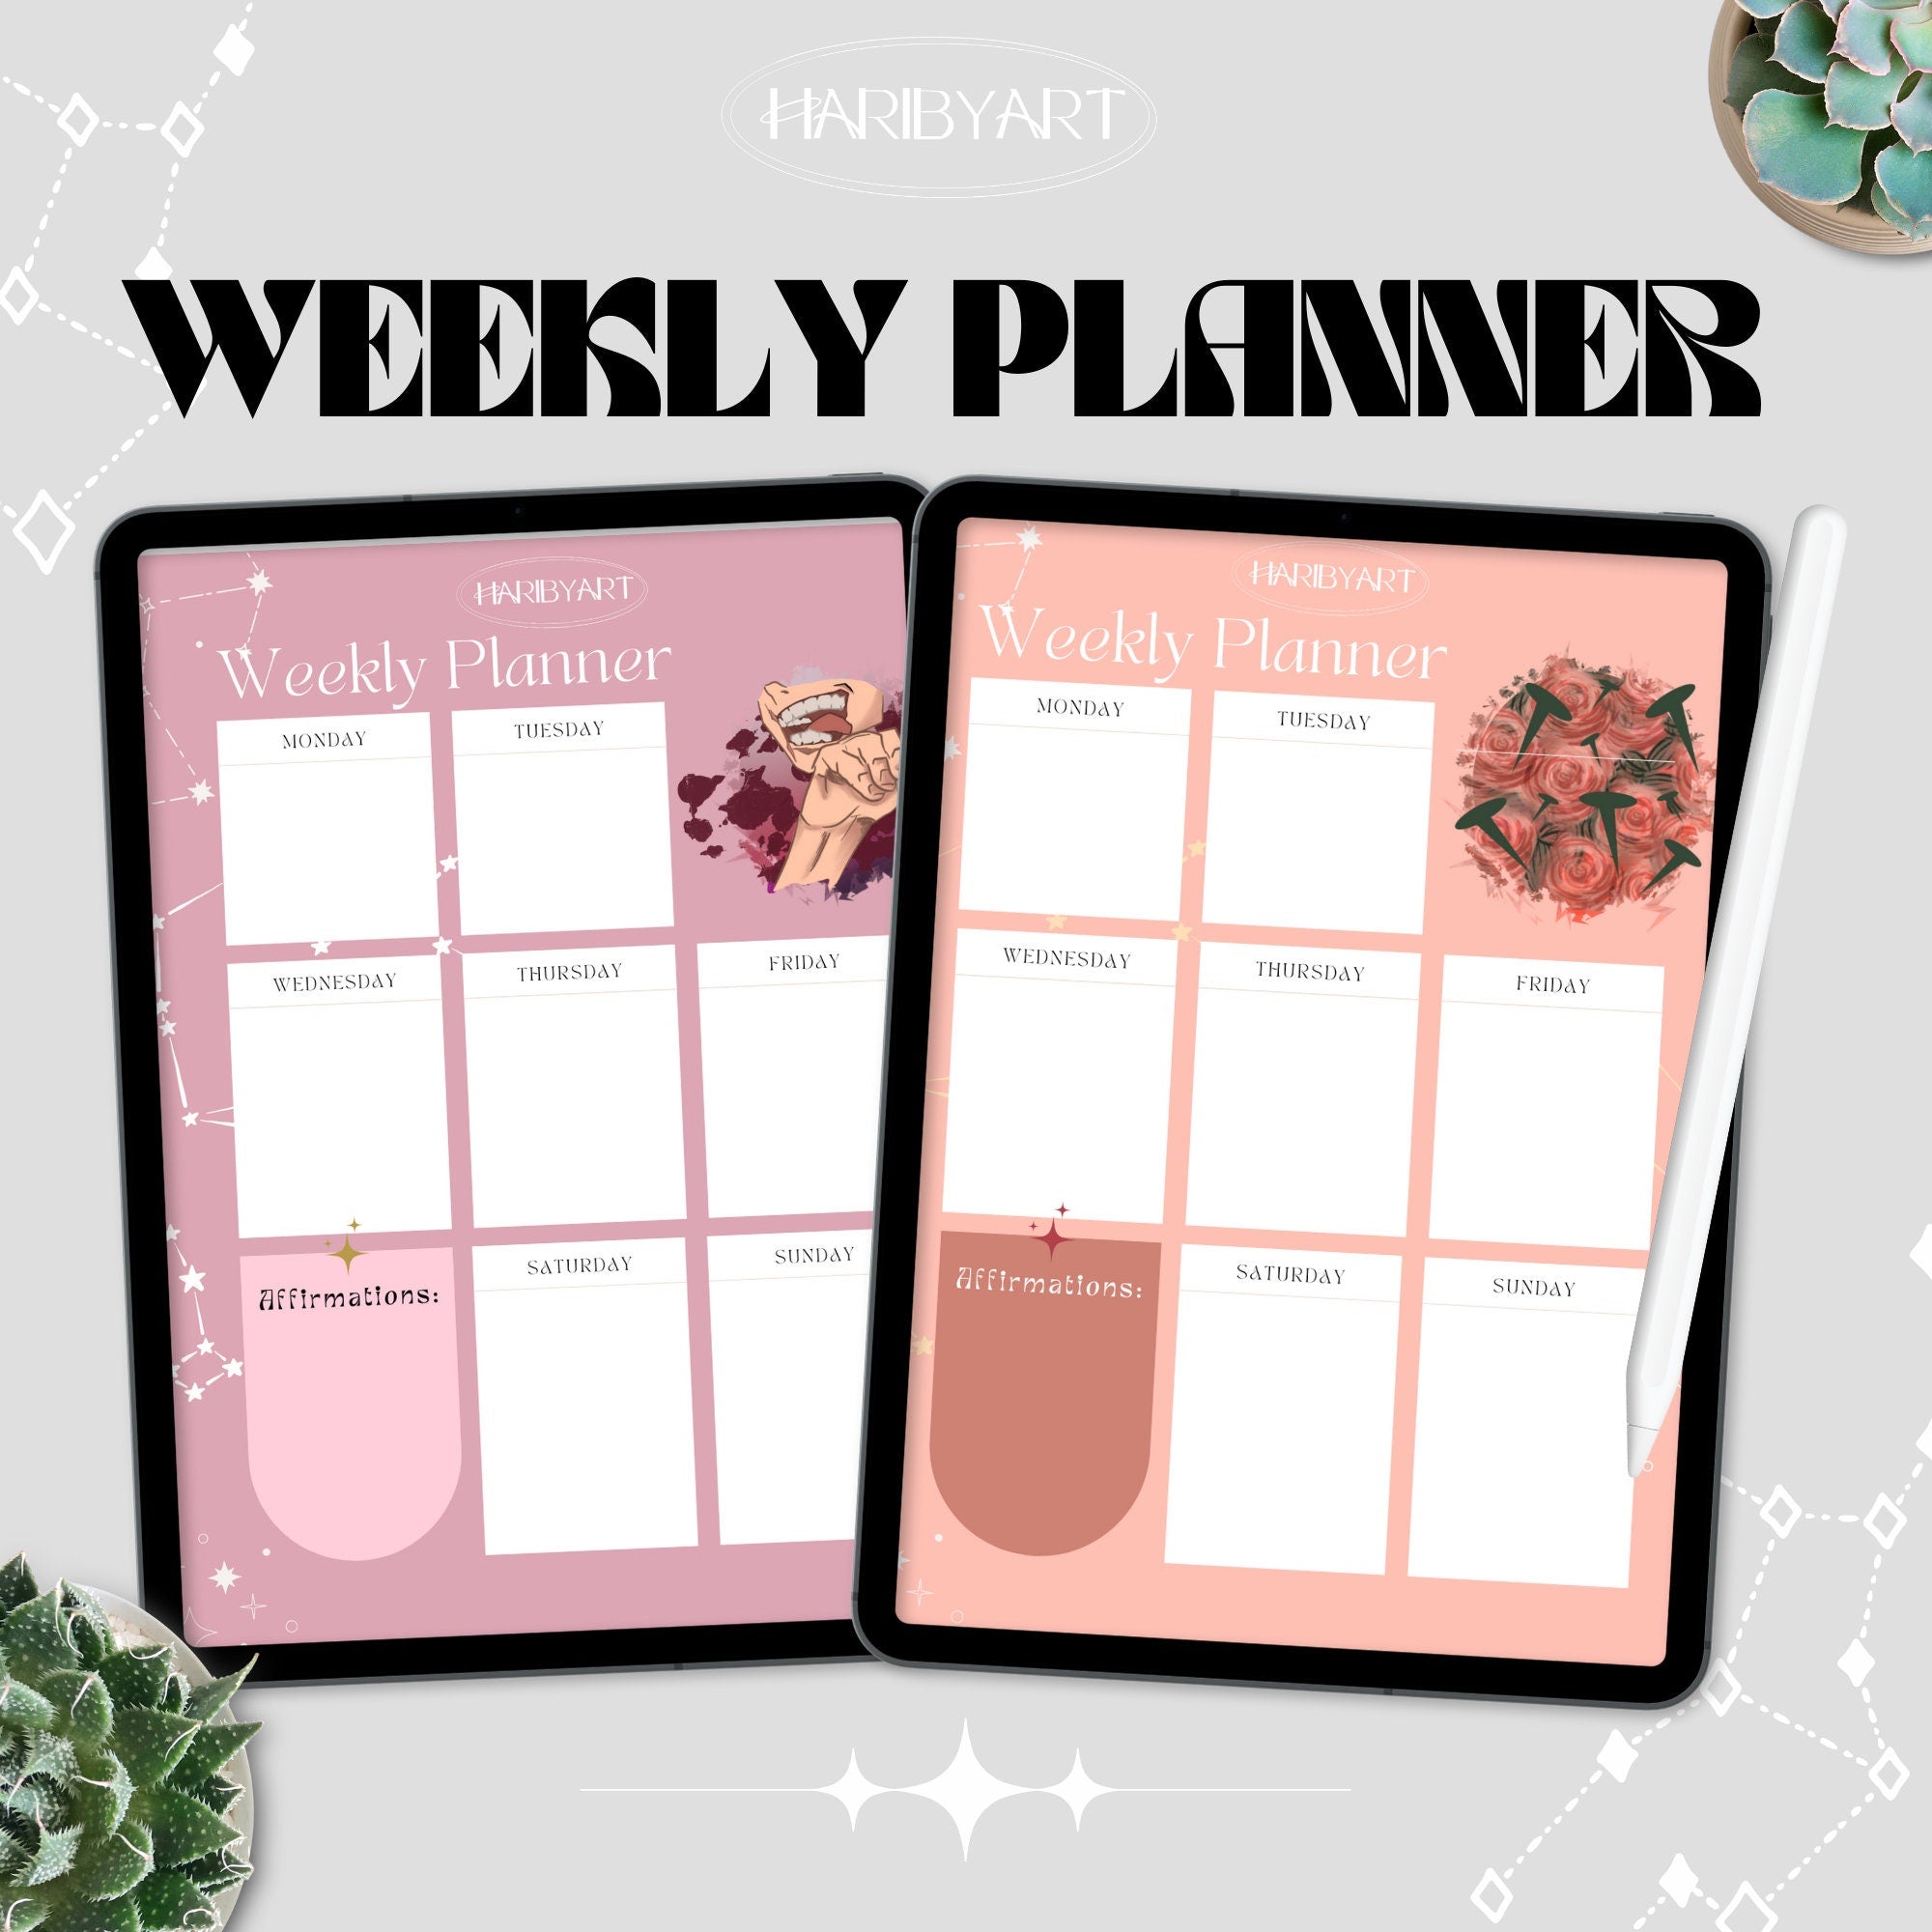 Cute Anime Daily Planner 2023-2024: 2023-2024 ᴏғғɪᴄɪᴀʟ Planner For  Fans|Perfect Cute Anime Planner 2023 With Large Note To Mark Appointements  & ... & To Do List ...: Publisher, Yukari: Amazon.com: Books